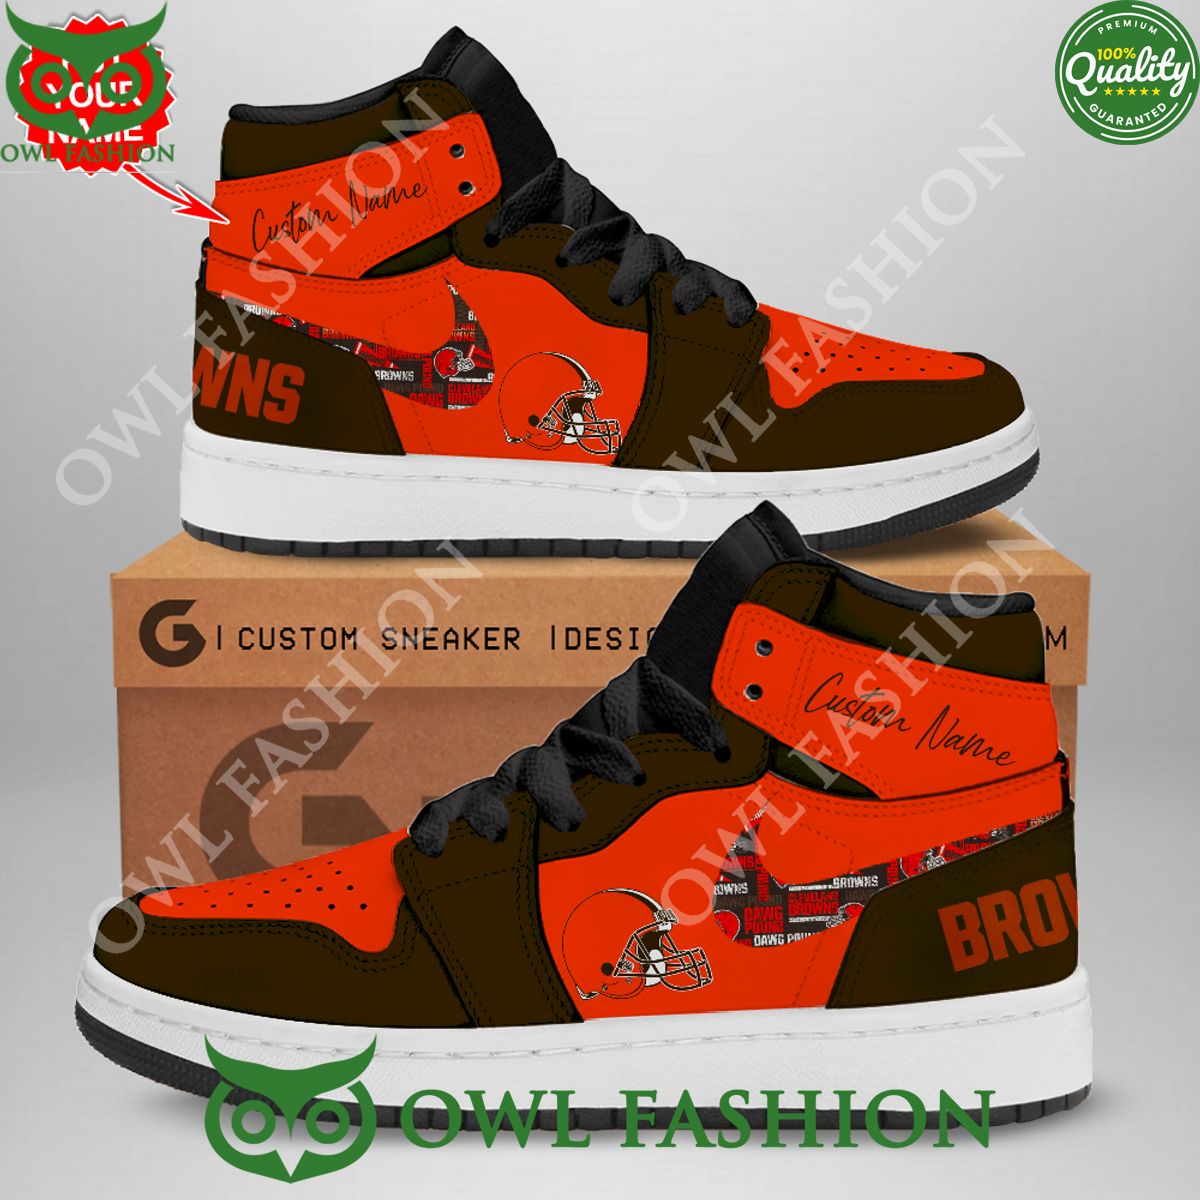 Customized Cleveland Browns Air Jordan Limited